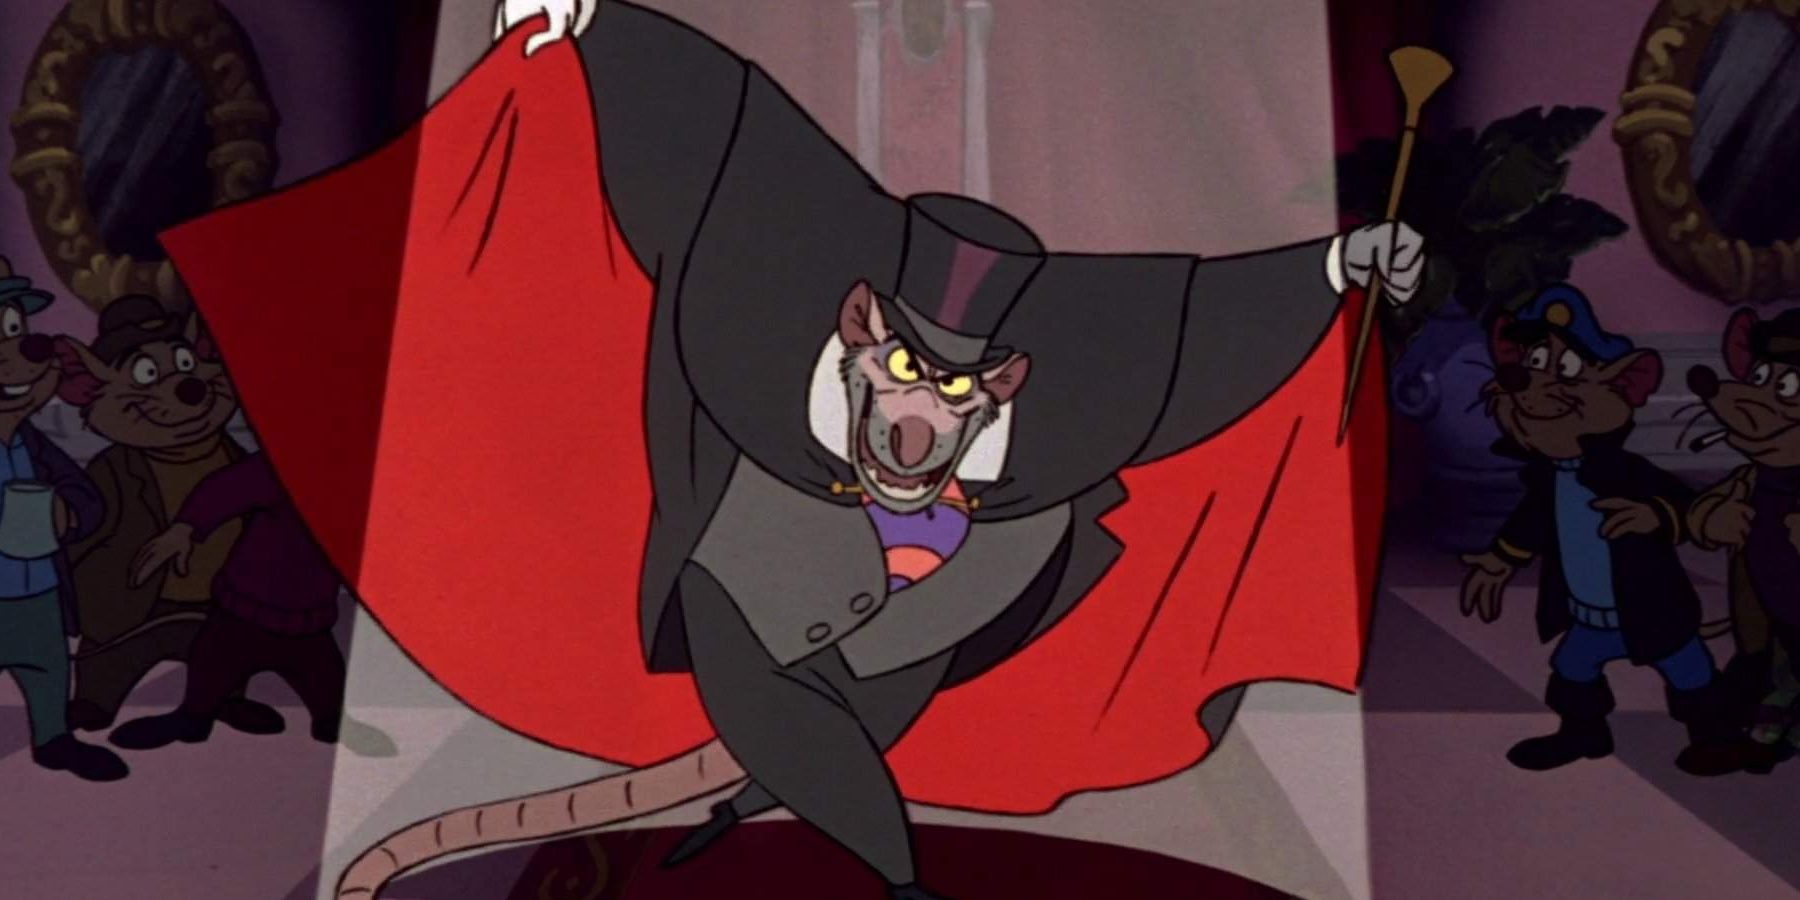 Professor Ratigan bowing with his cape in The Great Mouse Detective 